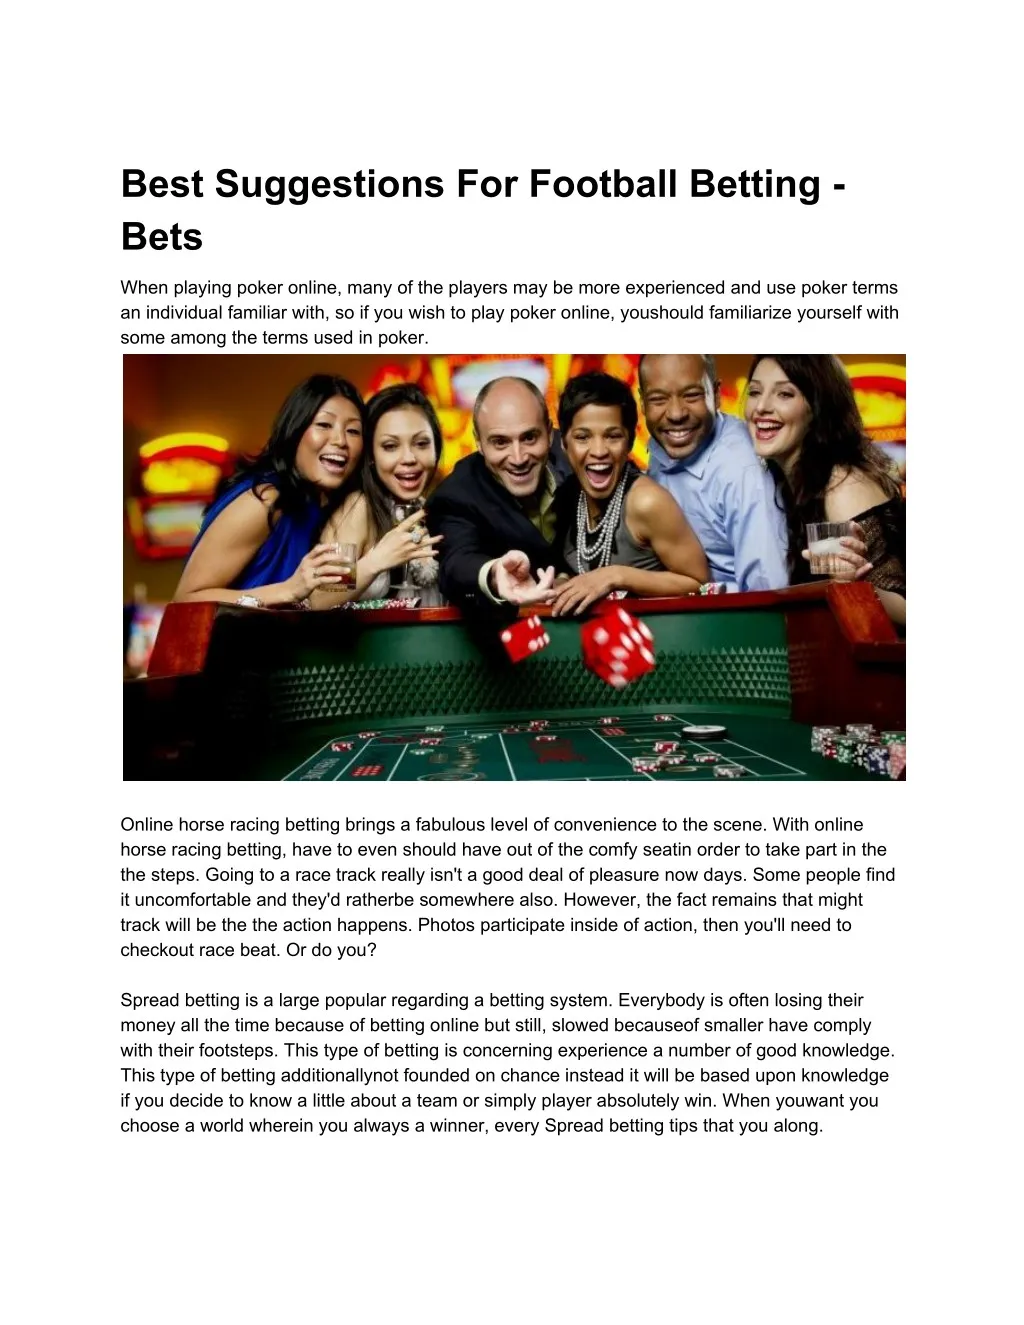 best suggestions for football betting bets